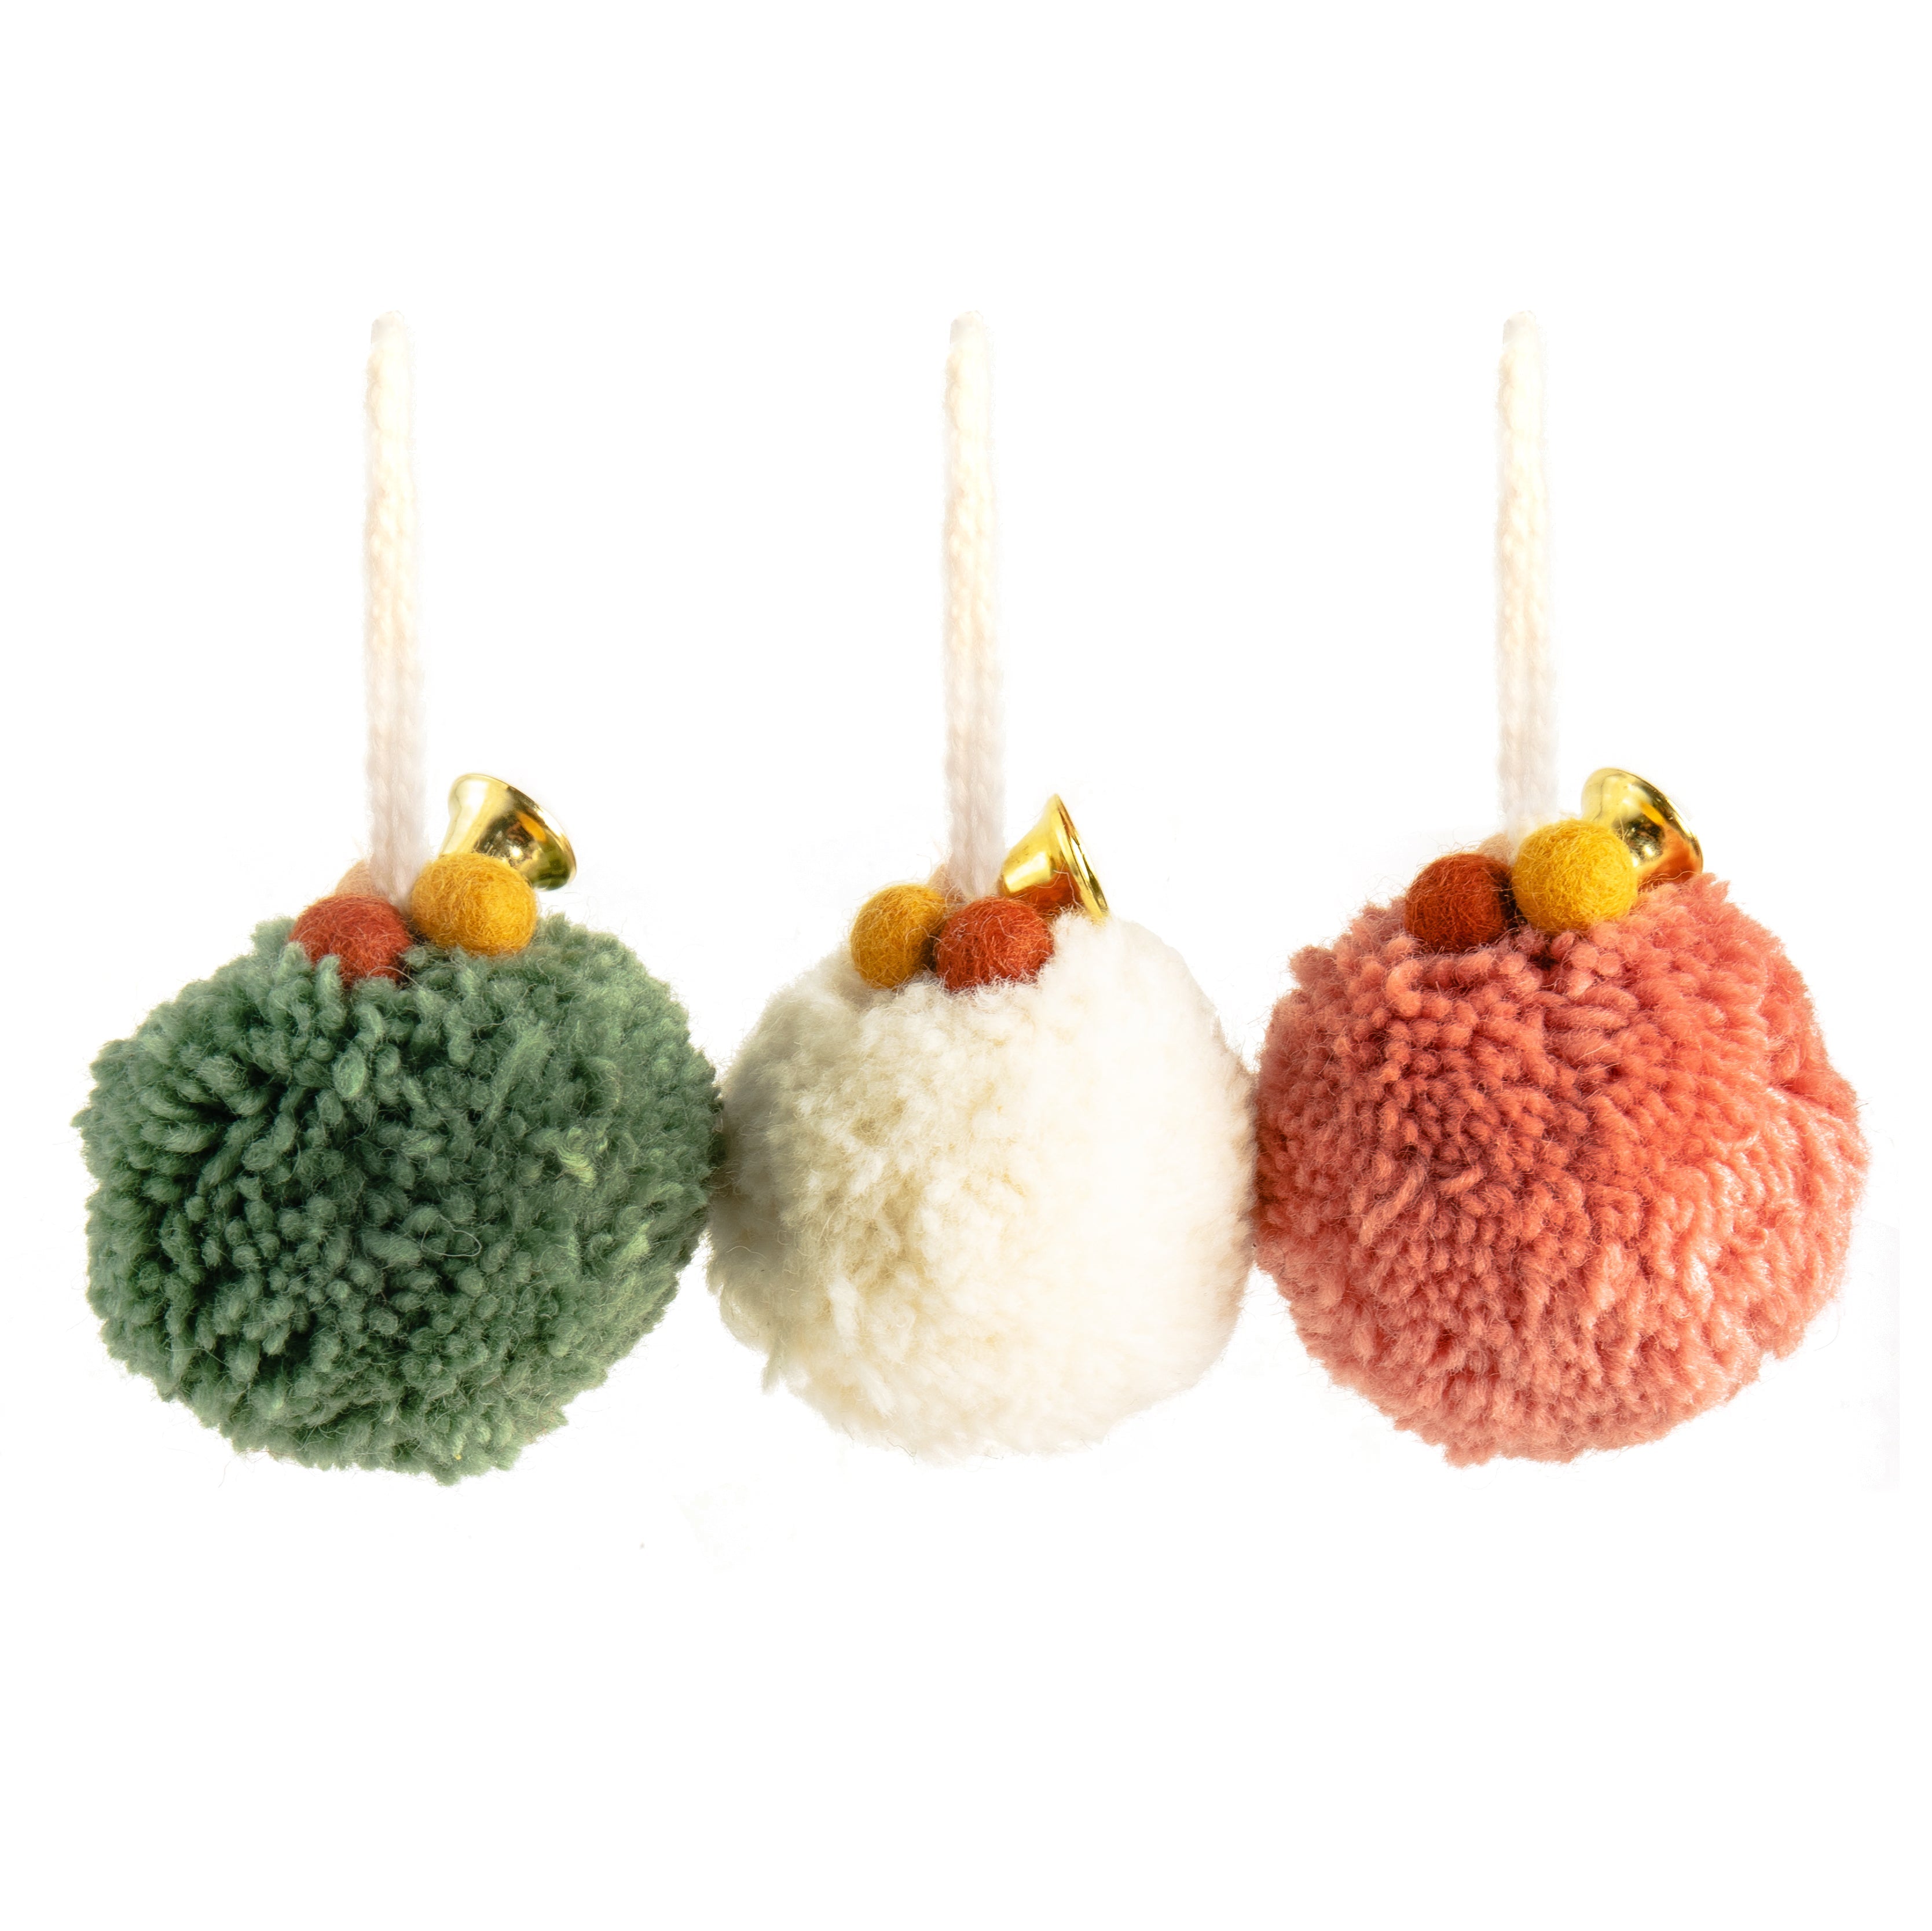 Woolly Baubles (Set of 3) - Christmas Decoration